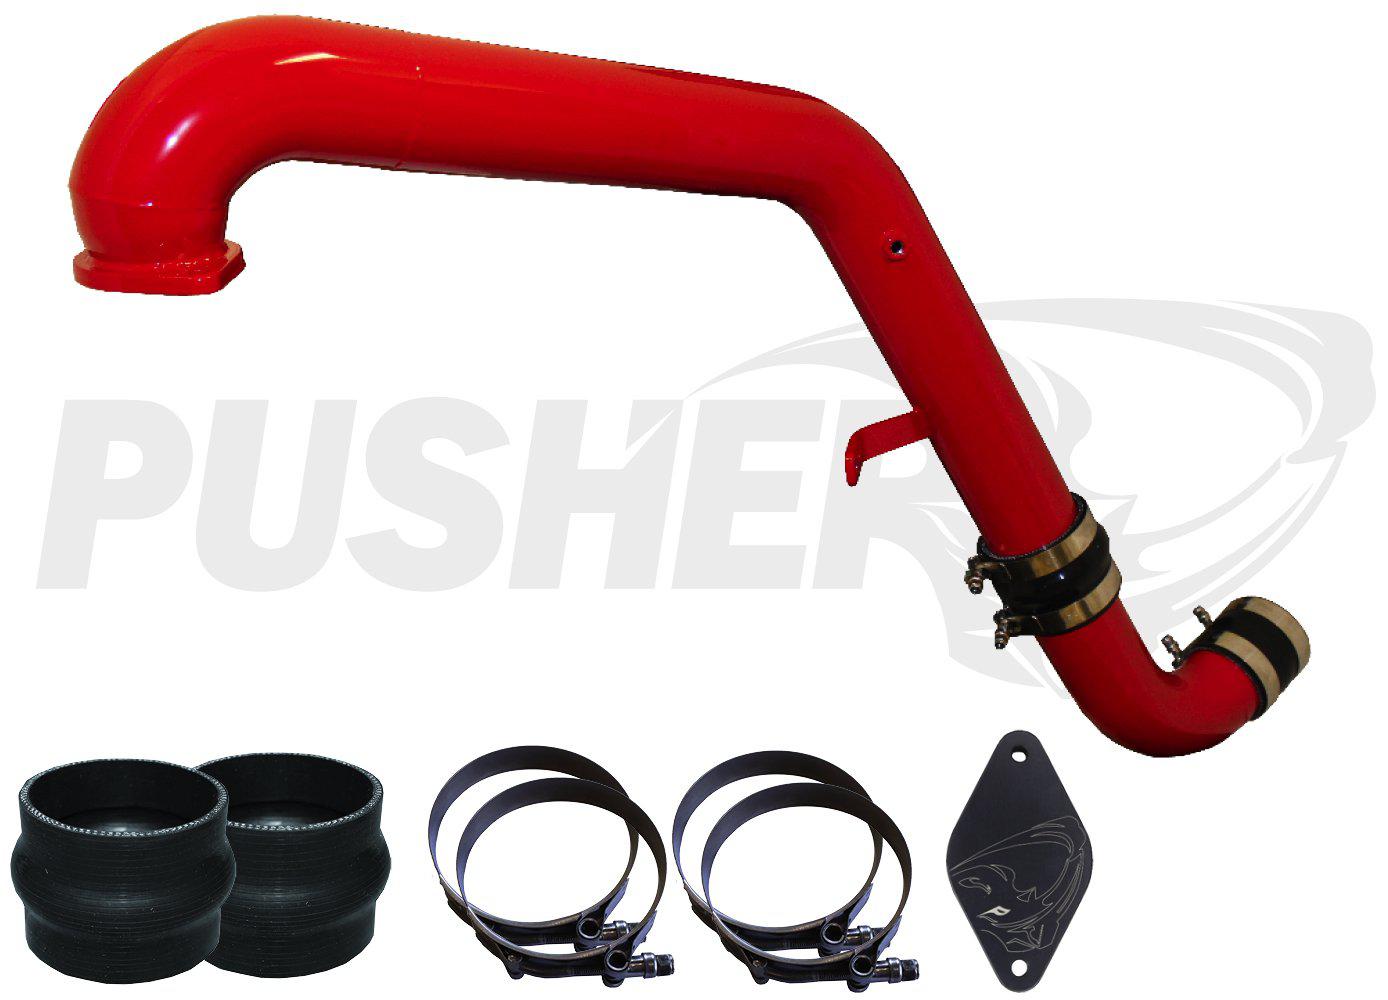 2011-2016 Duramax HD Passenger Charge Charge System (PGD1116BT)-Intercooler Piping-Pusher-PGD1116BT_R-Dirty Diesel Customs